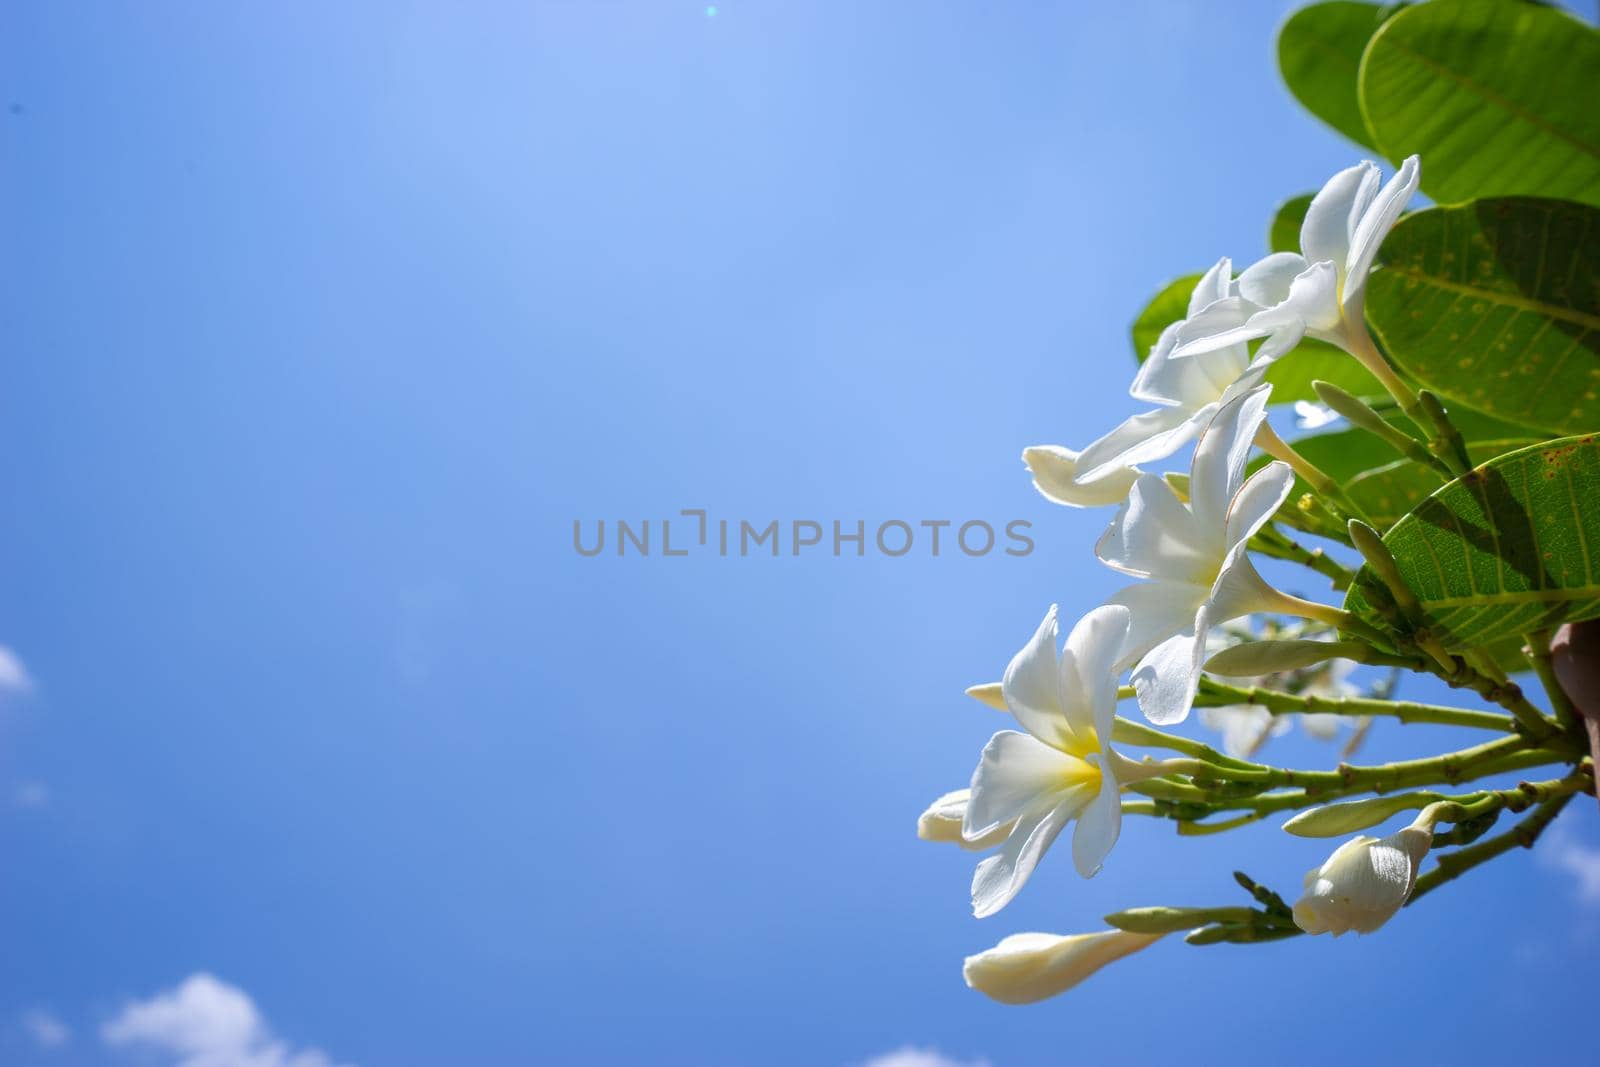 Plumeria flowers are White and Yellow are Blossoming on tree with blue sky by domonite